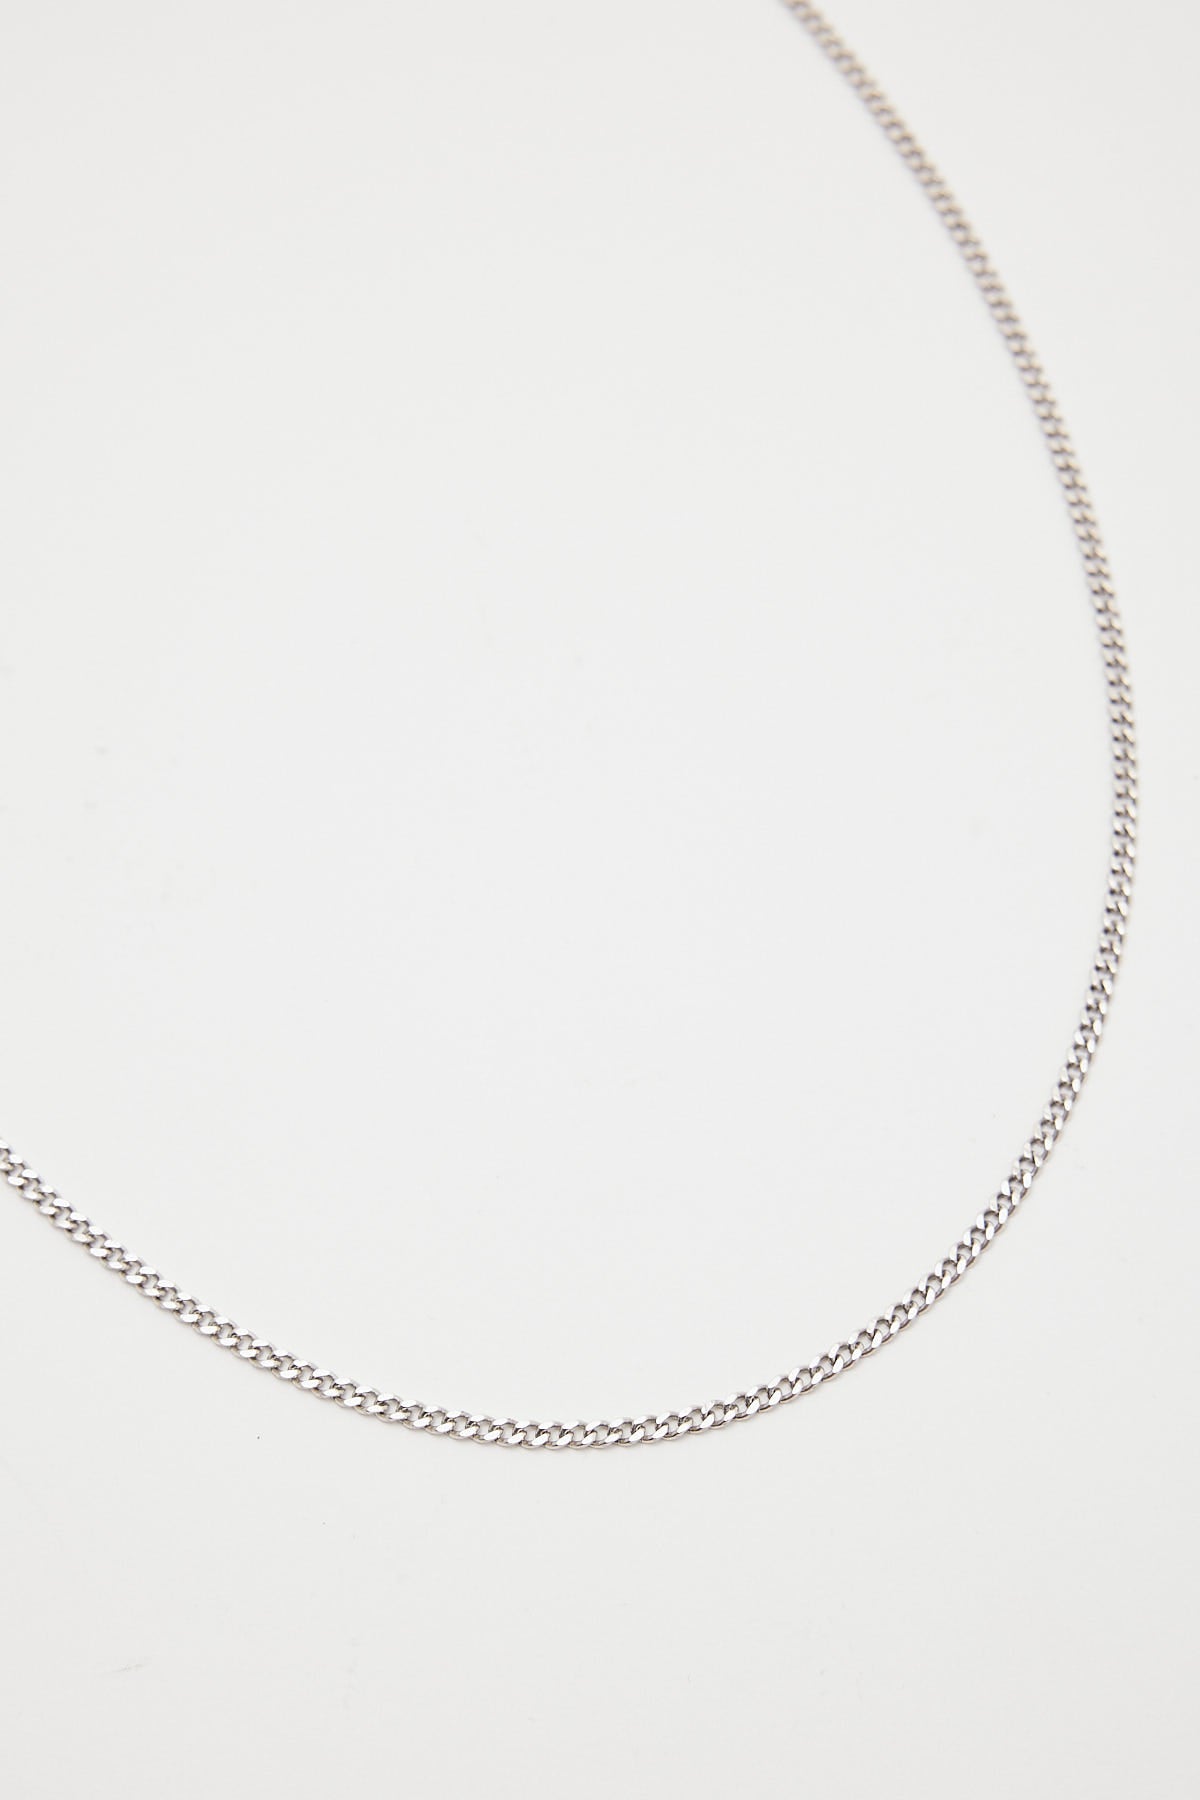 Neovision Beyond Sterling Silver Curb Chain Necklace Sterling Silver